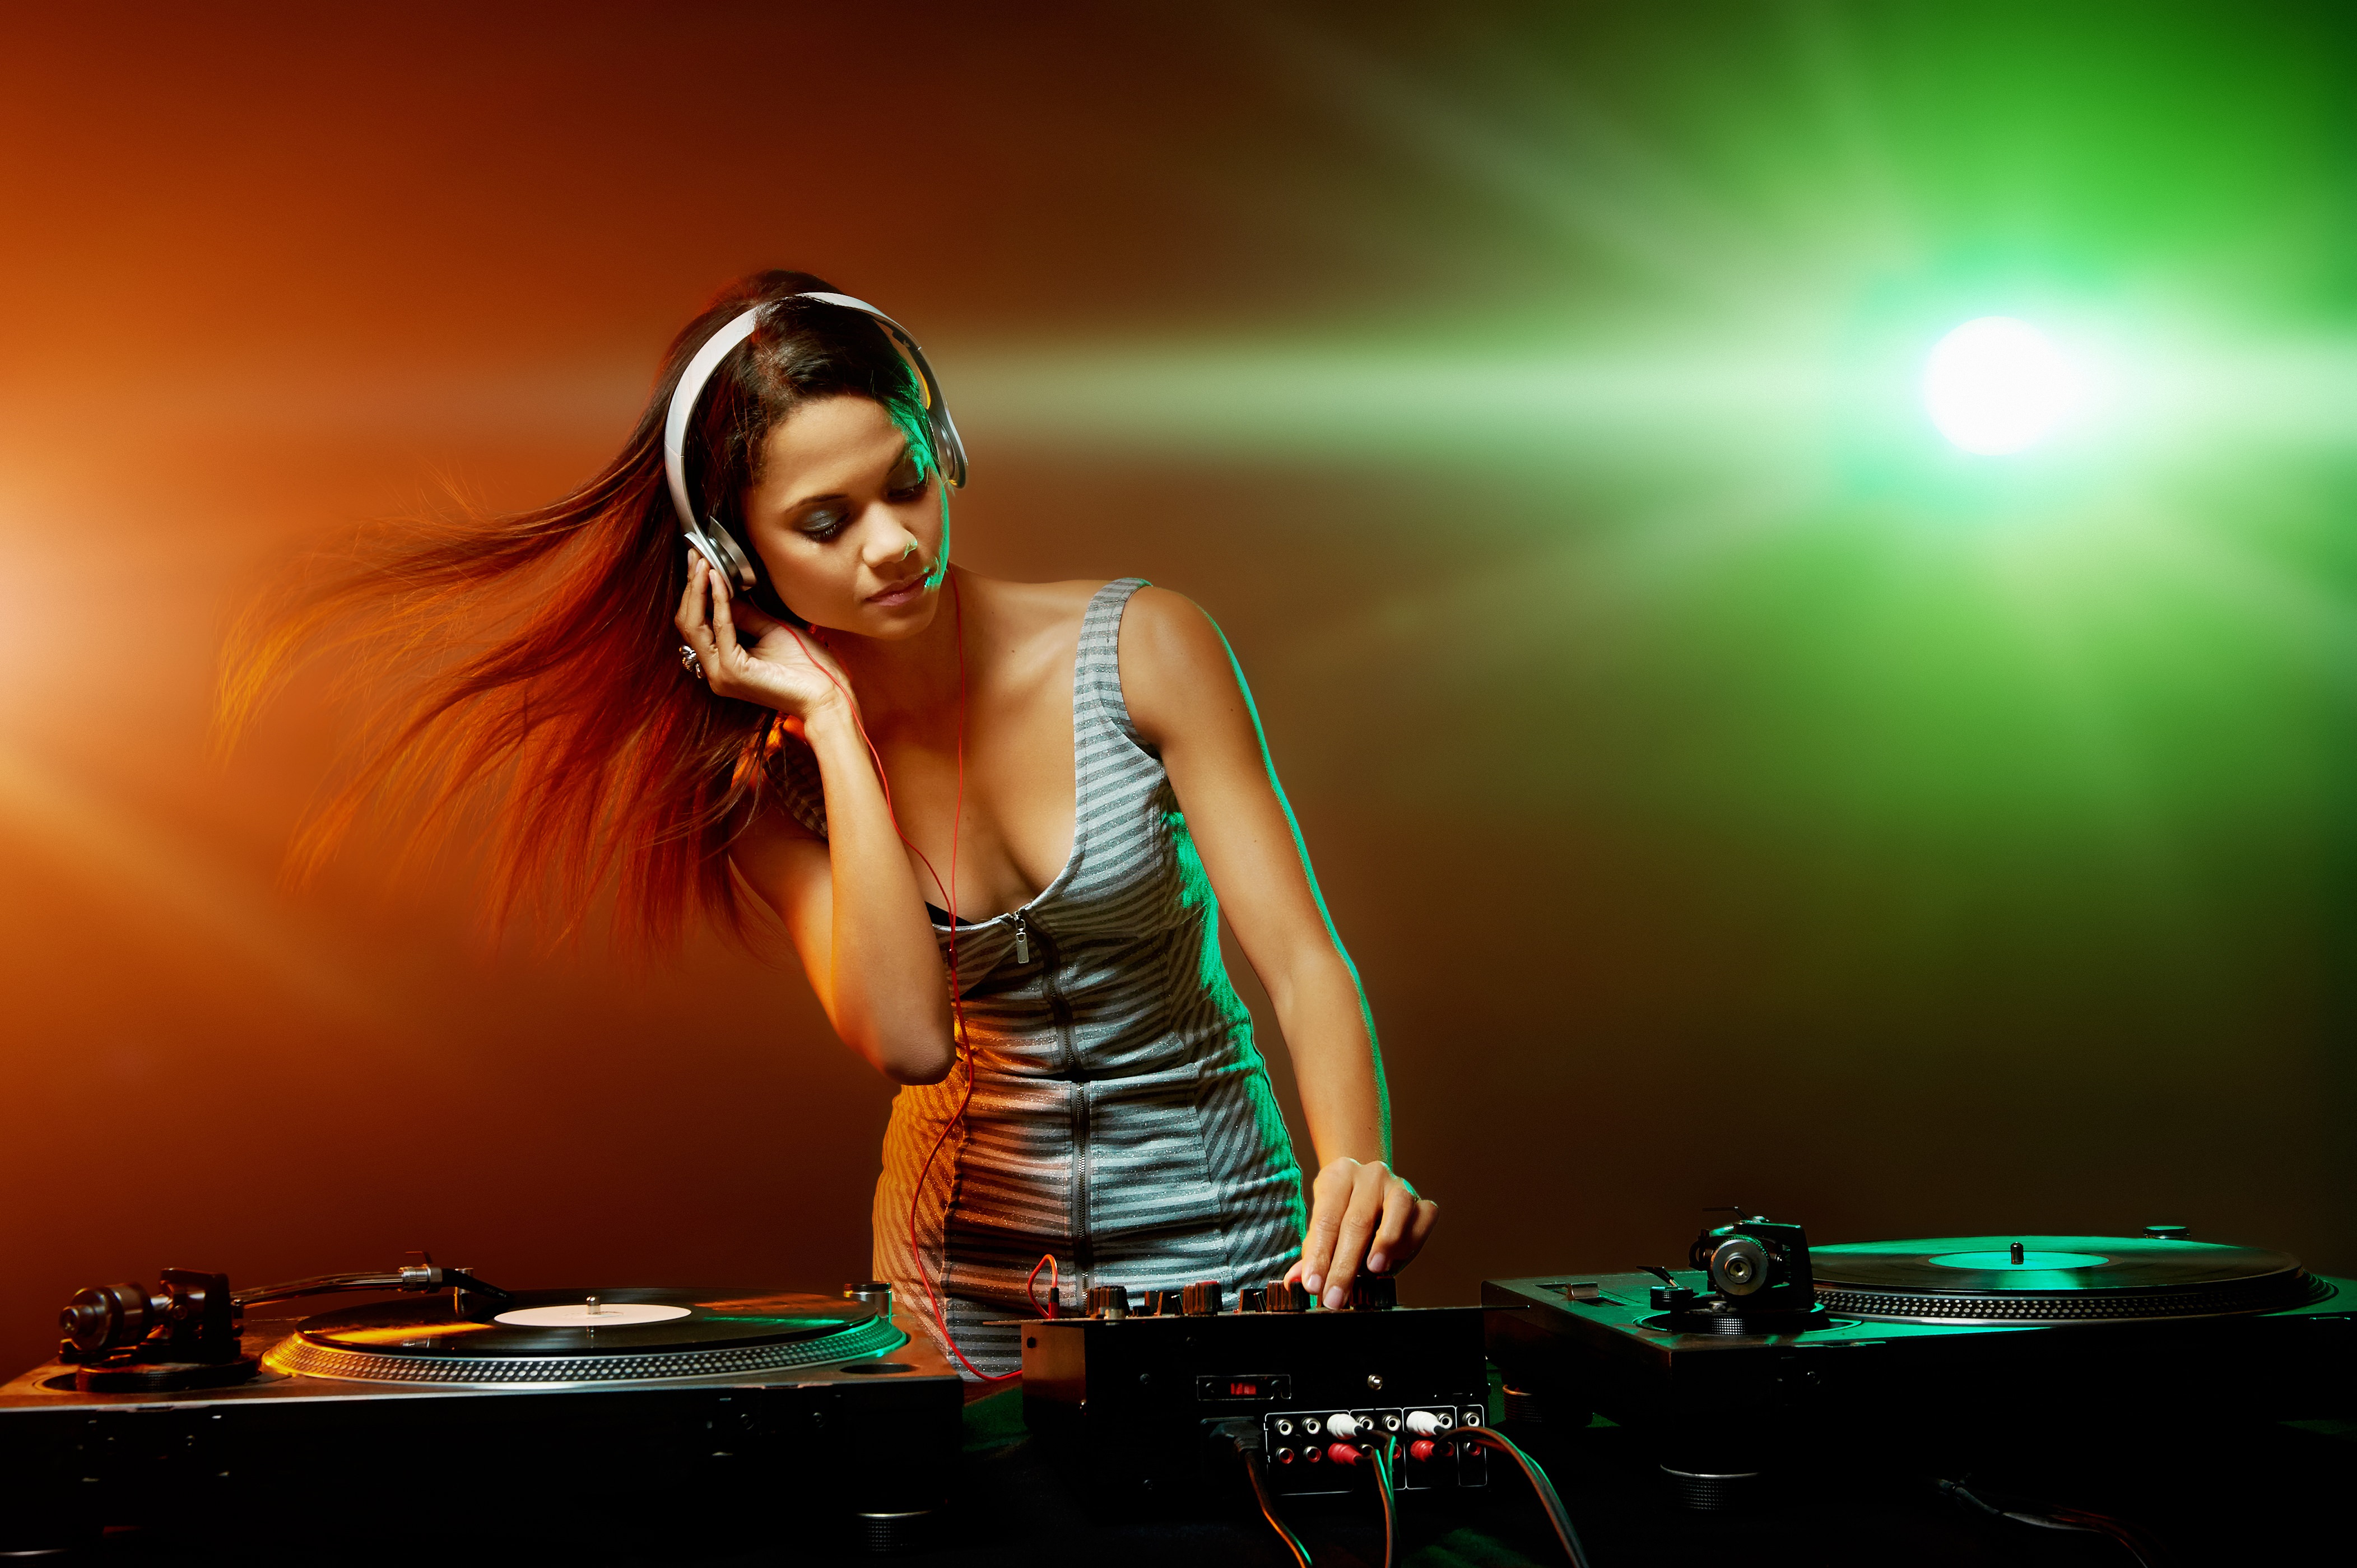 Free download 21 Party Wallpaper Disco Background Image [4207x2799] for your Desktop, Mobile & Tablet. Explore Wallpaper DJ 2016. Dj Wallpaper Wallpaper DJ Dj Background 2016